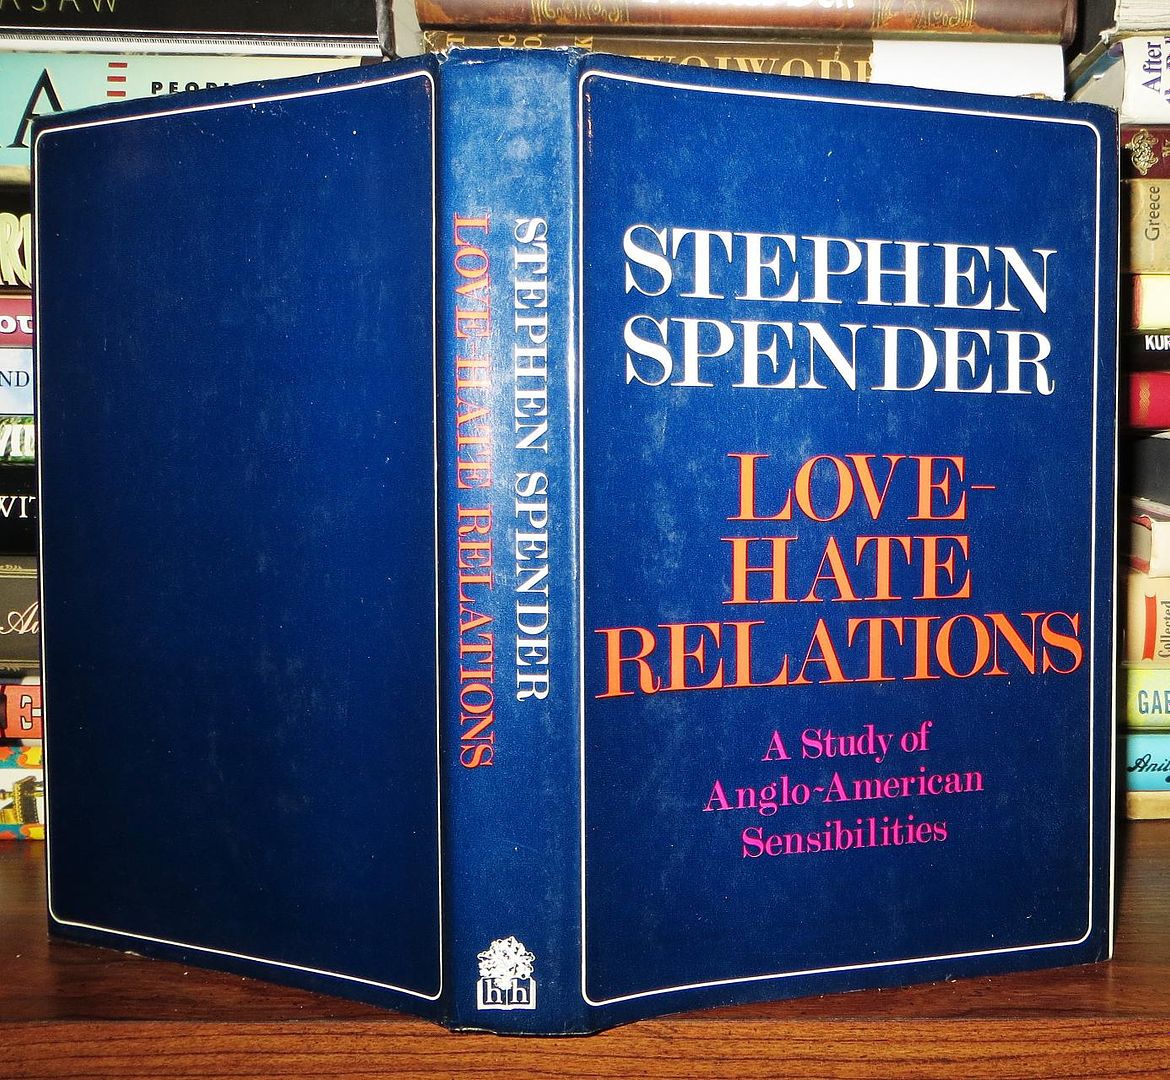 STEPHEN SPENDER - Love Hate Relations Study of Anglo-American Sensibilities